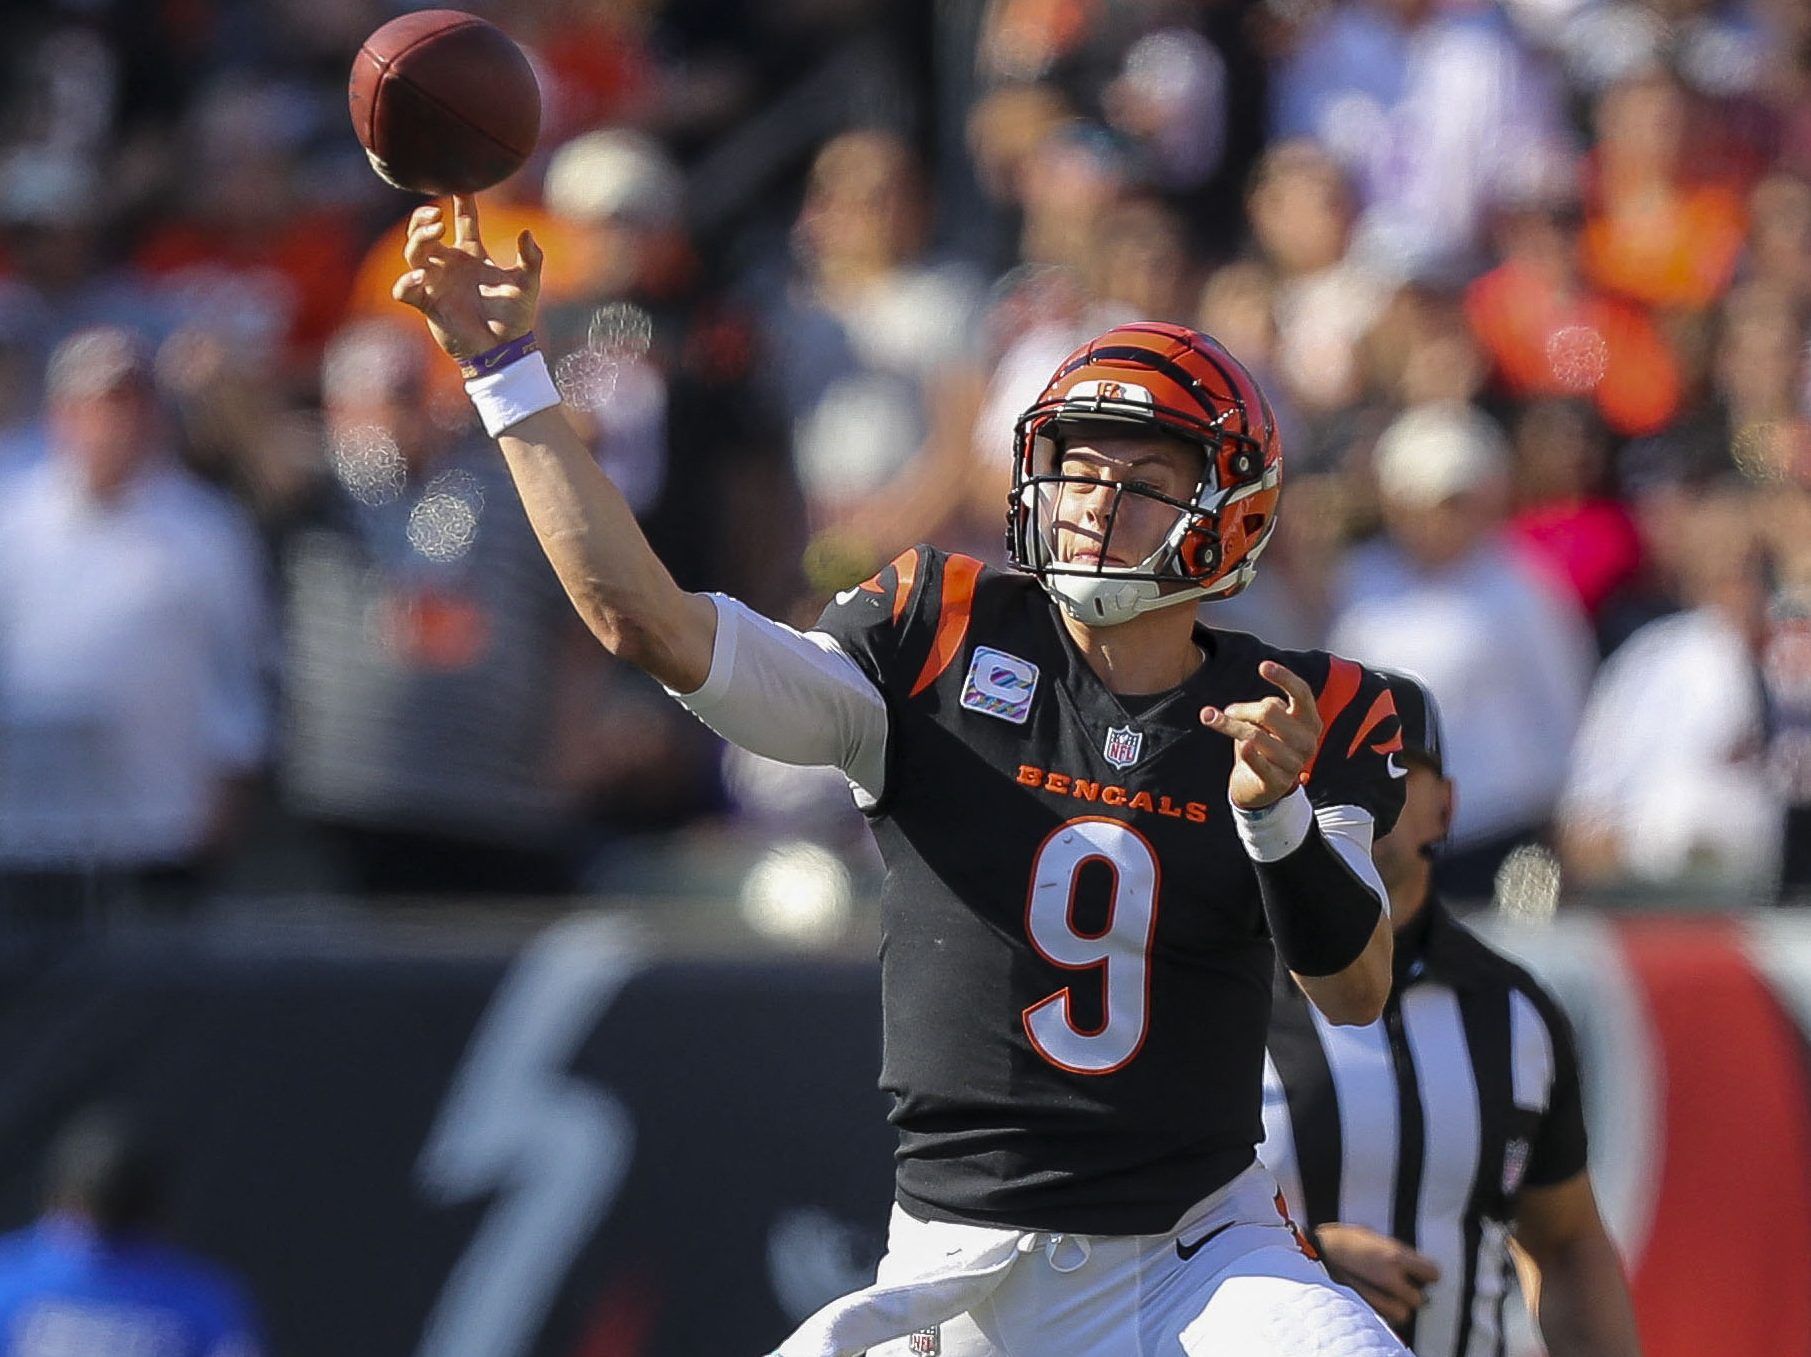 NFL WEEK 16 PICKS: Bengals ready to roar in New England